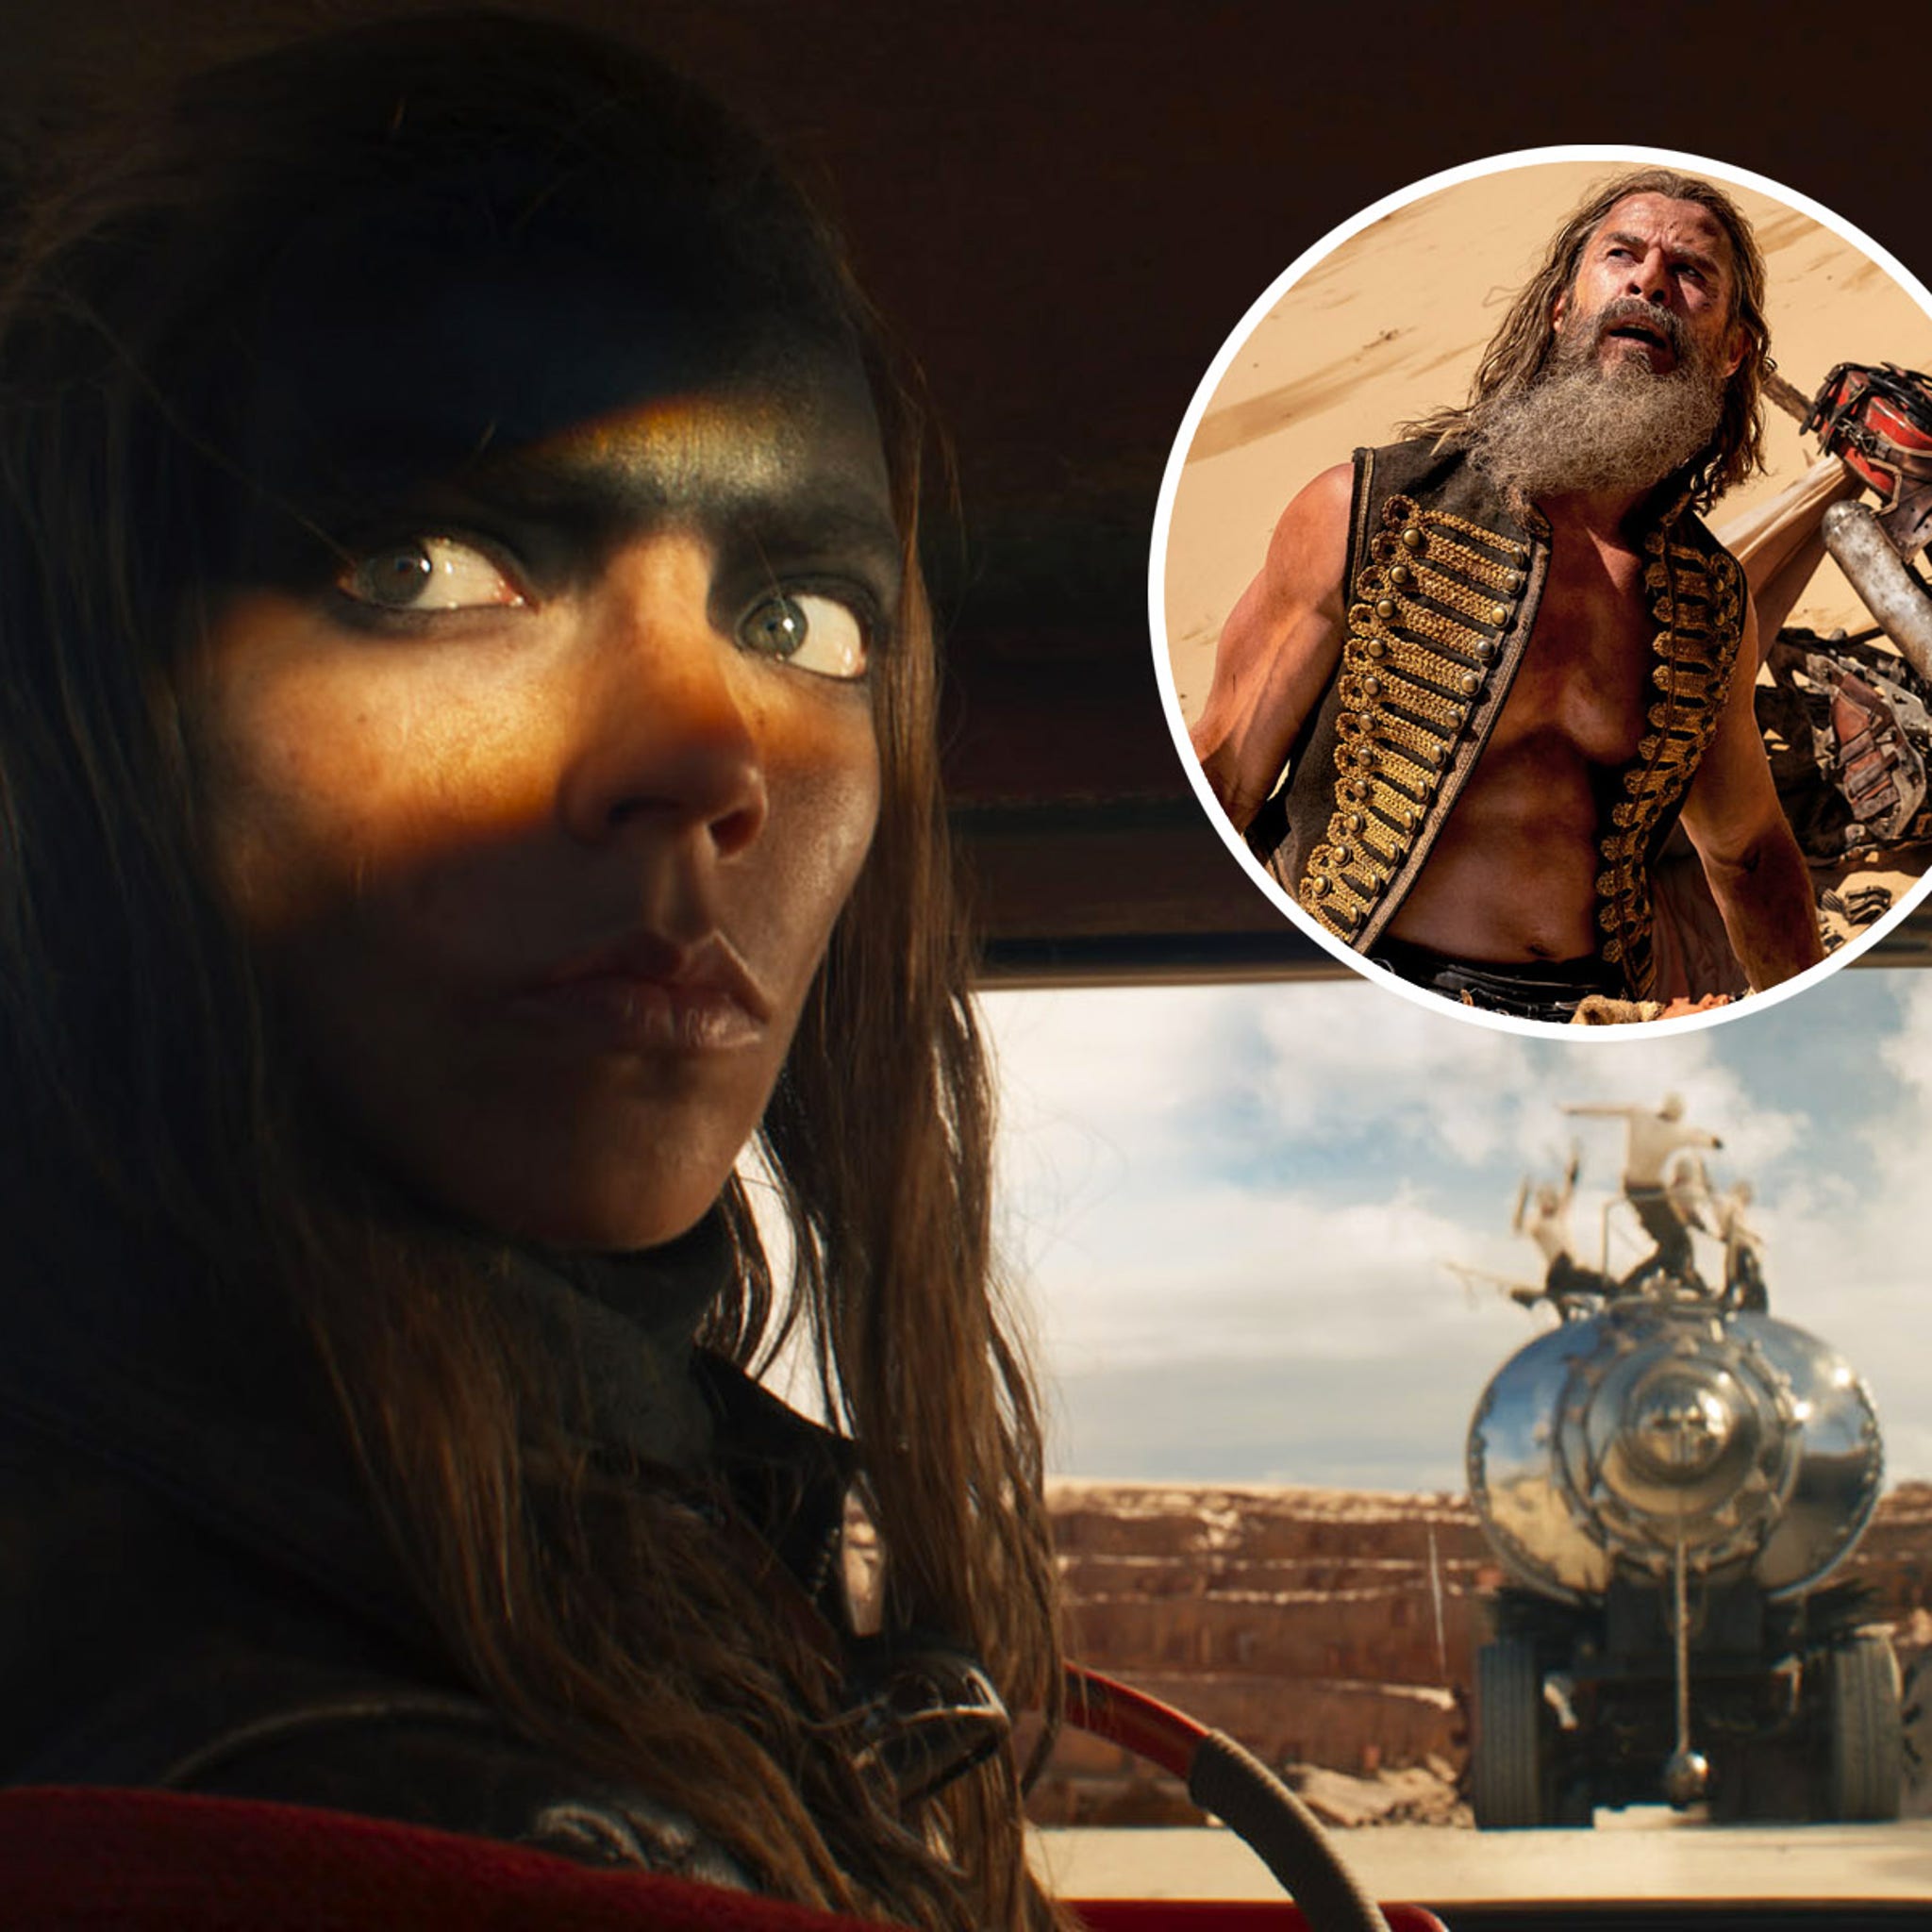 First look at Anya Taylor-Joy's transformation in Mad Max prequel